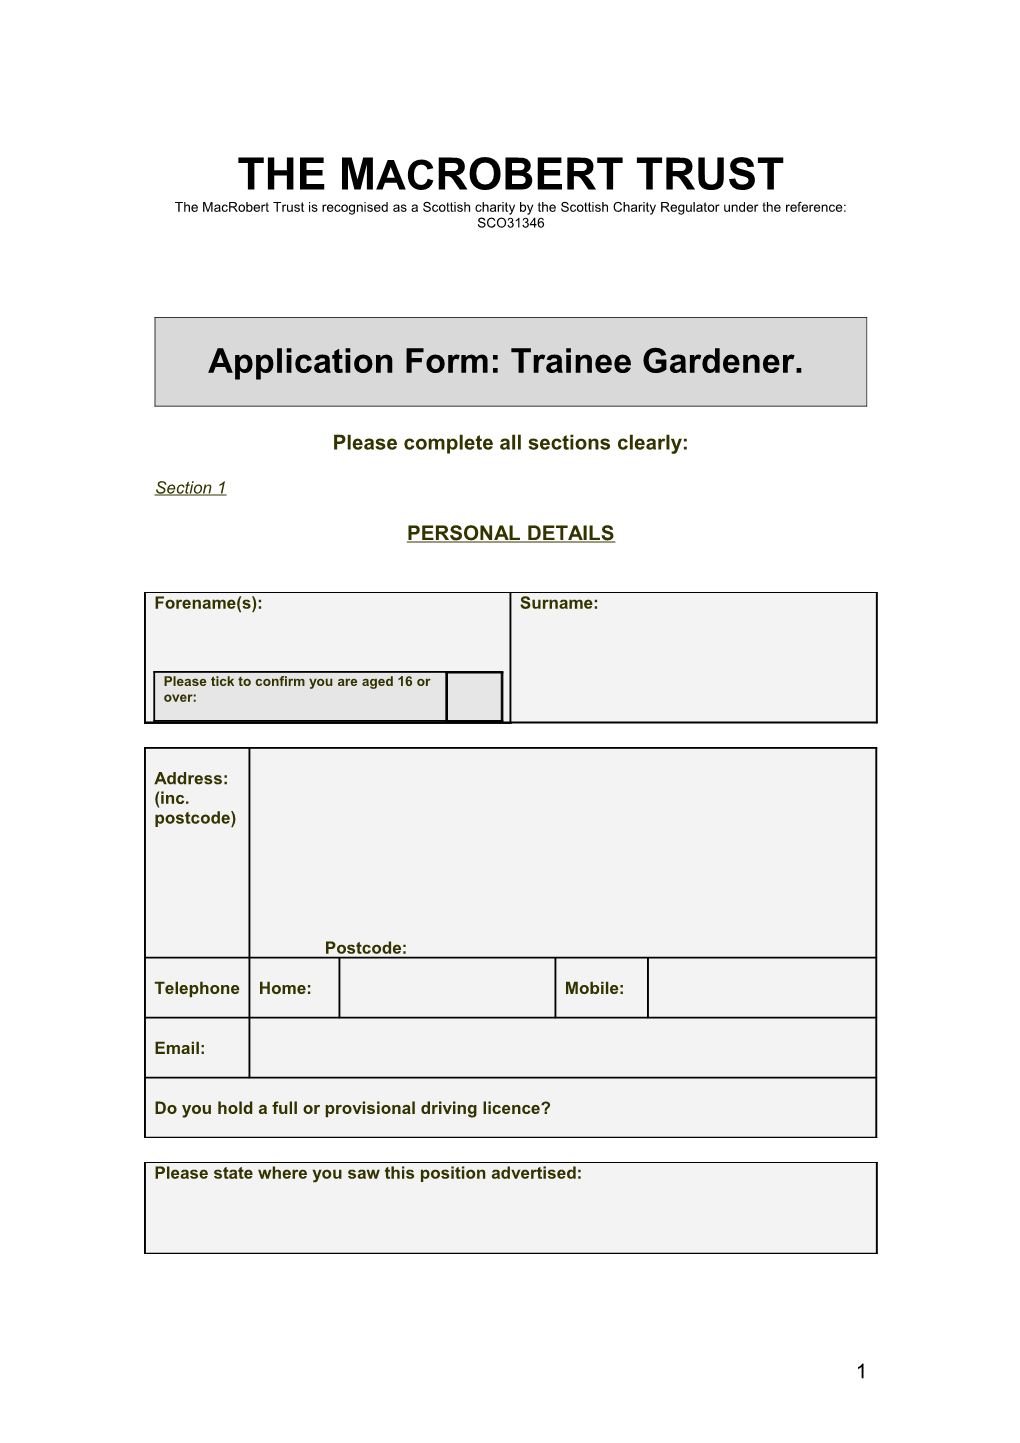 Application for Gardens Trainee Placement